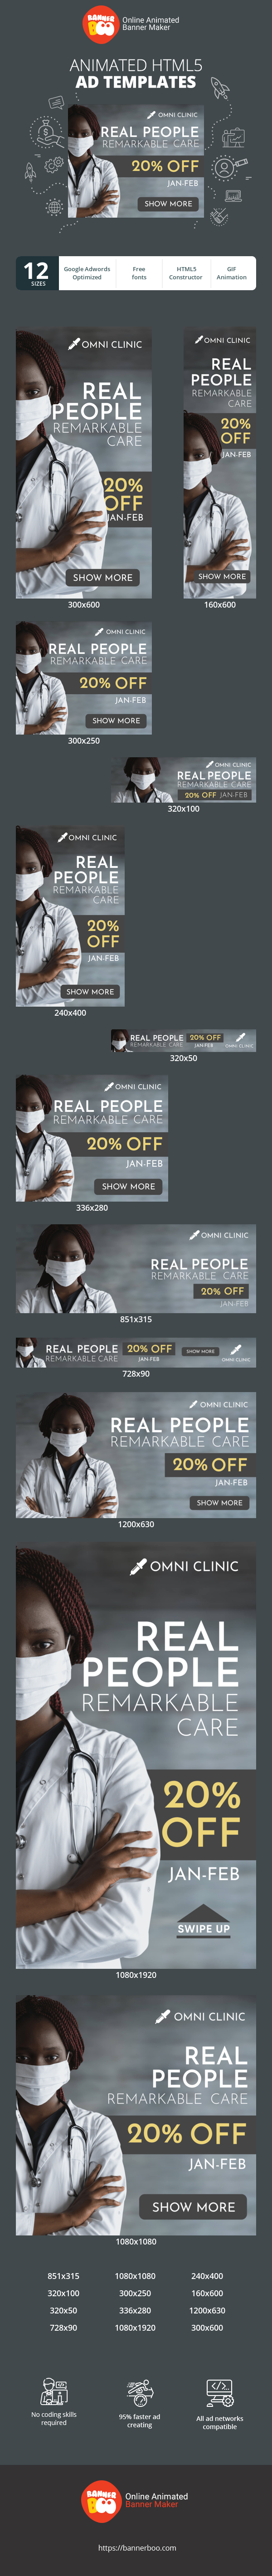 Banner ad template — Real People Remarkable Care — 20% Off Jan - Feb